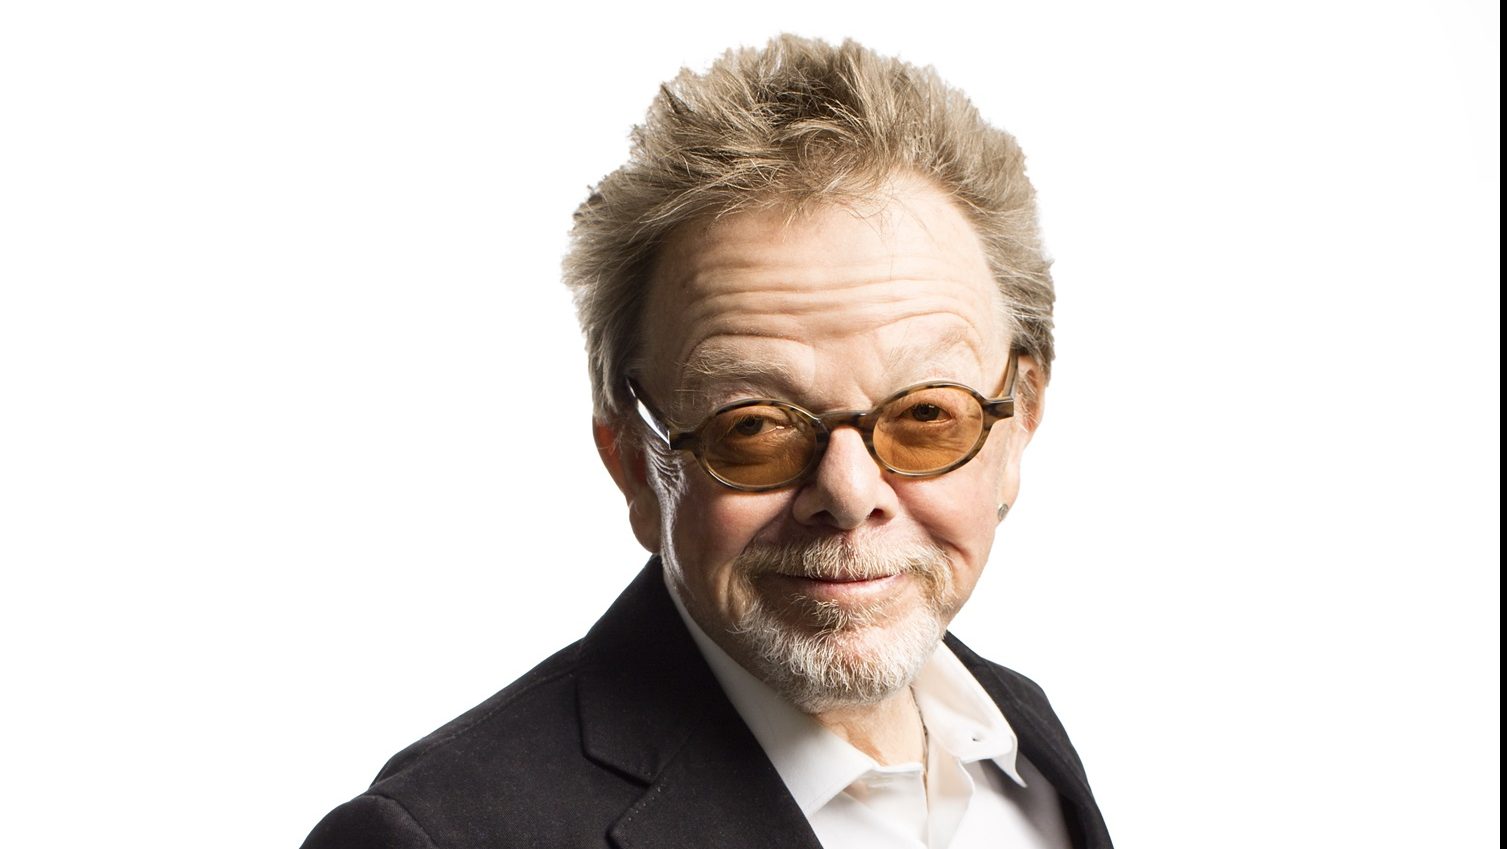 Paul Williams Shares Stories Behind ‘Emmet Otter’s Jug Band Christmas’